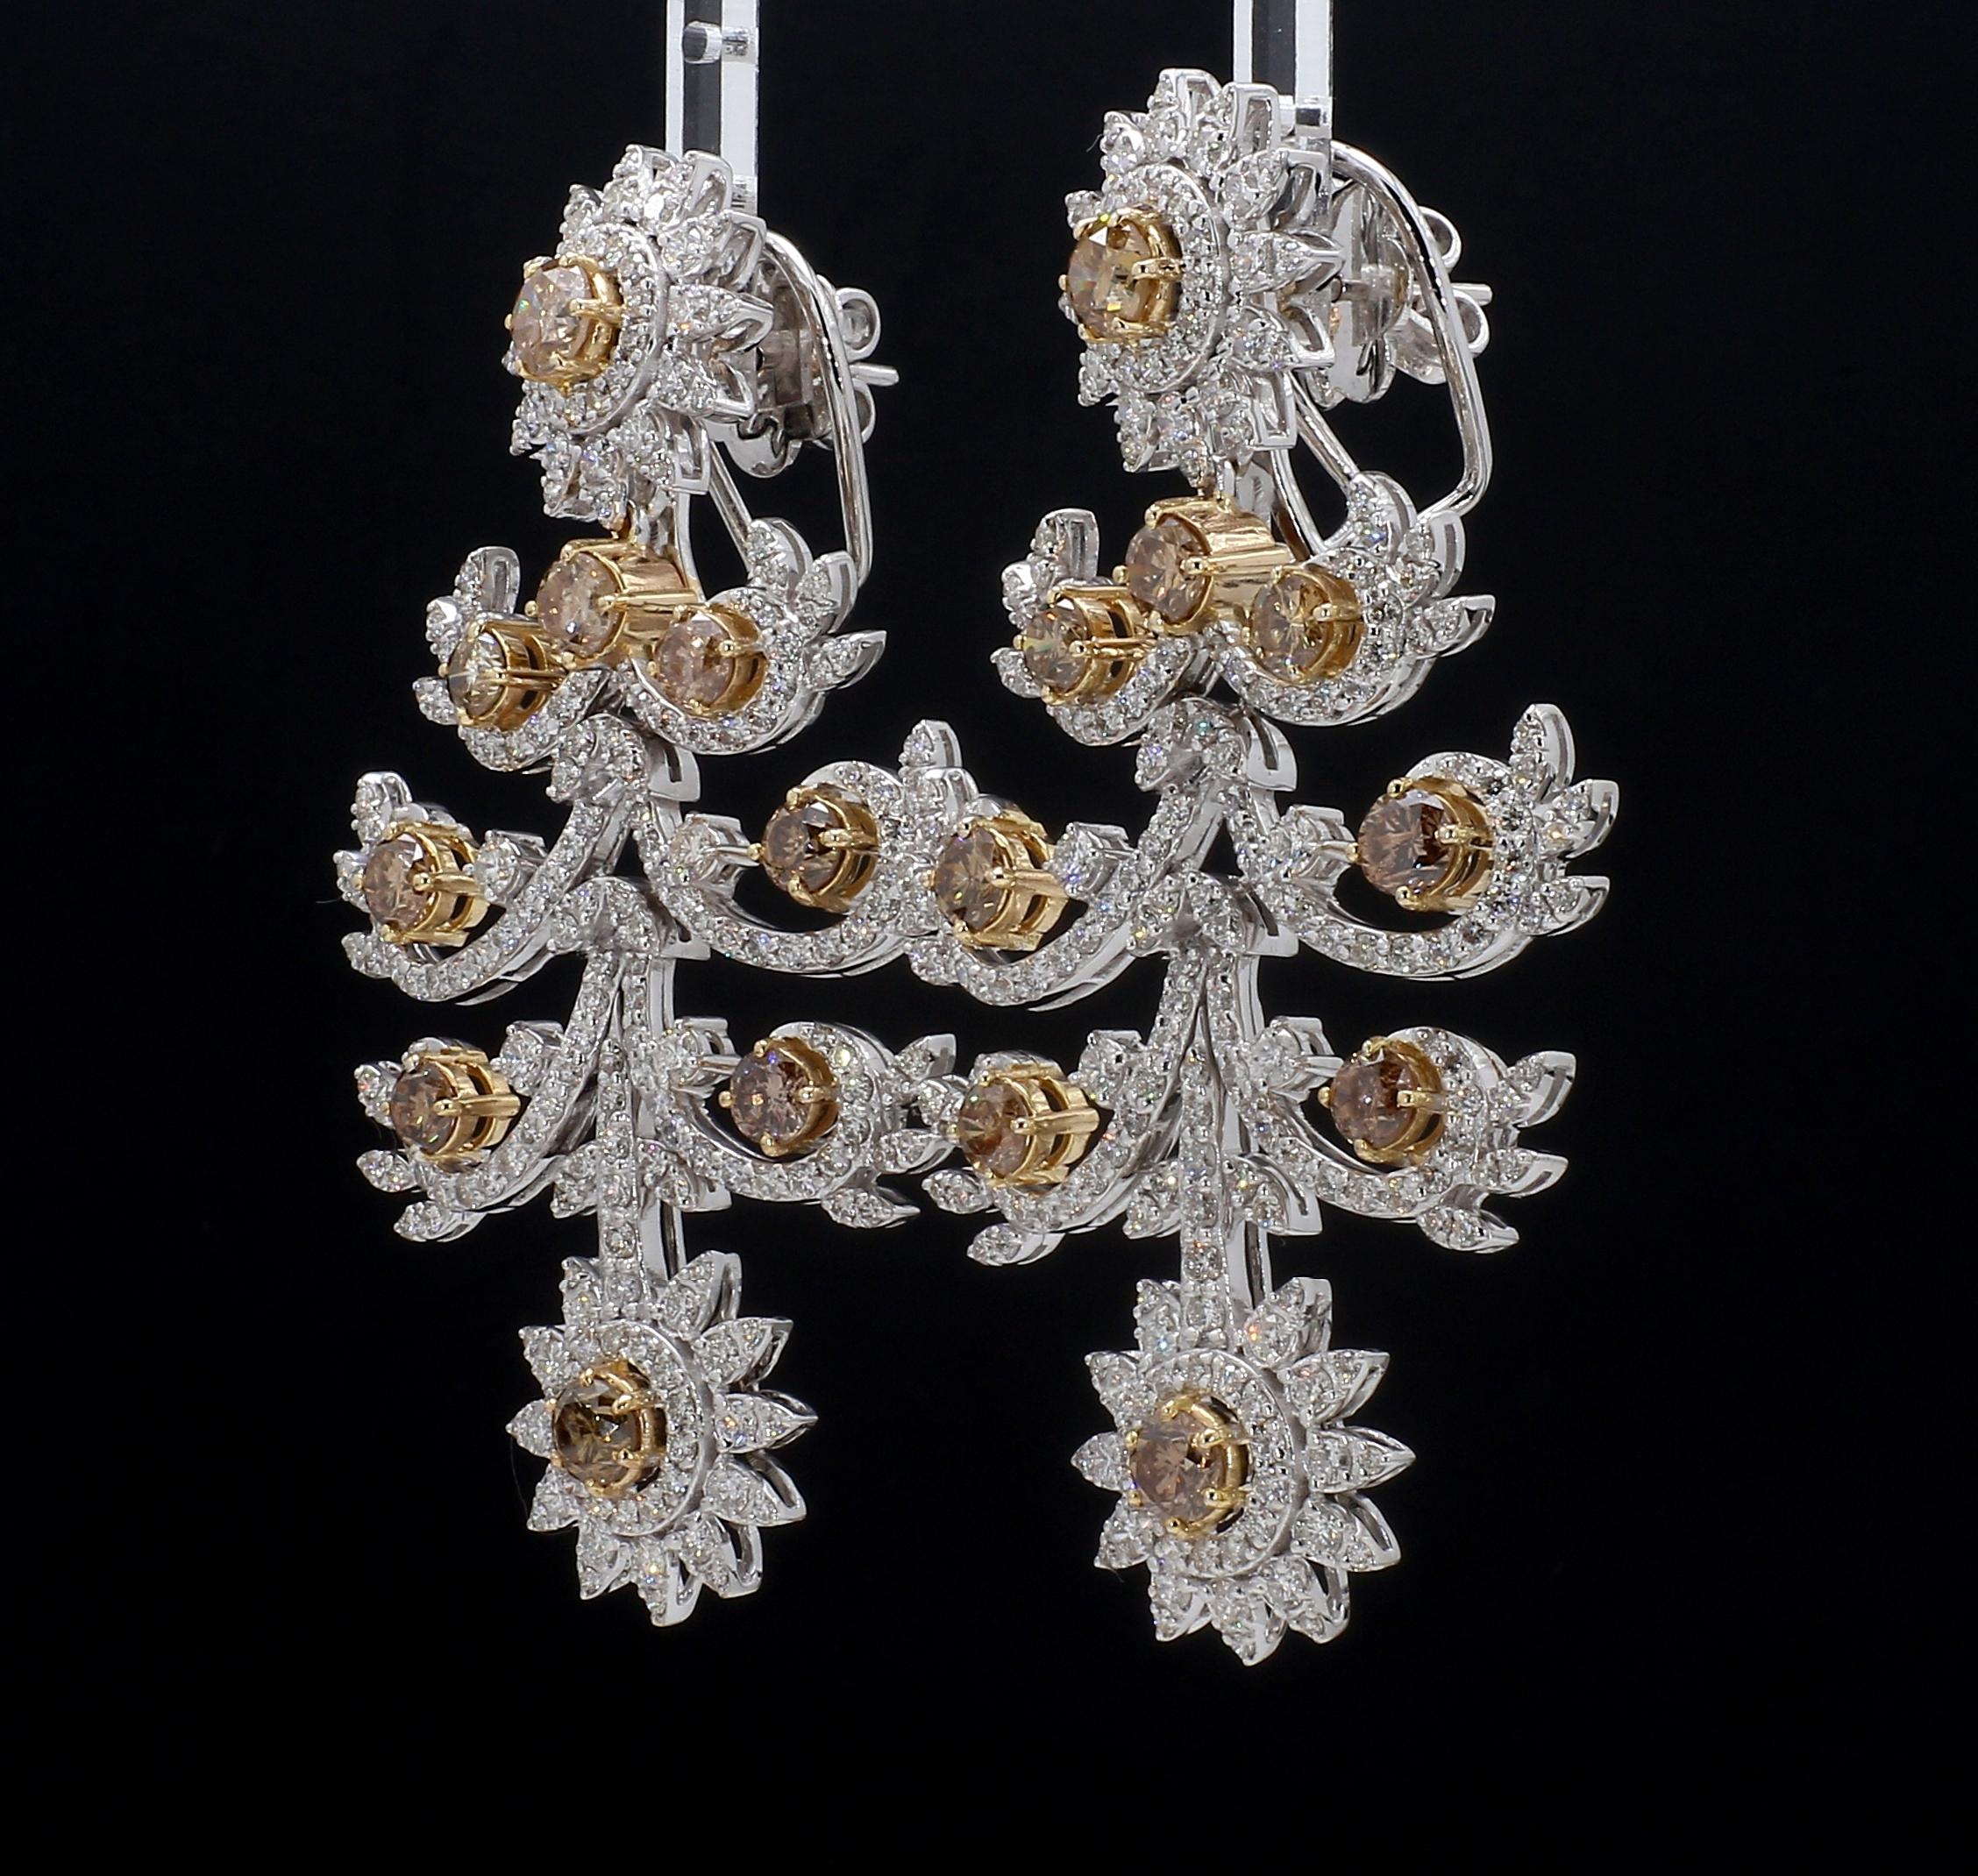 Anglo-Indian Champagne Diamond Chandelier White Gold Earrings